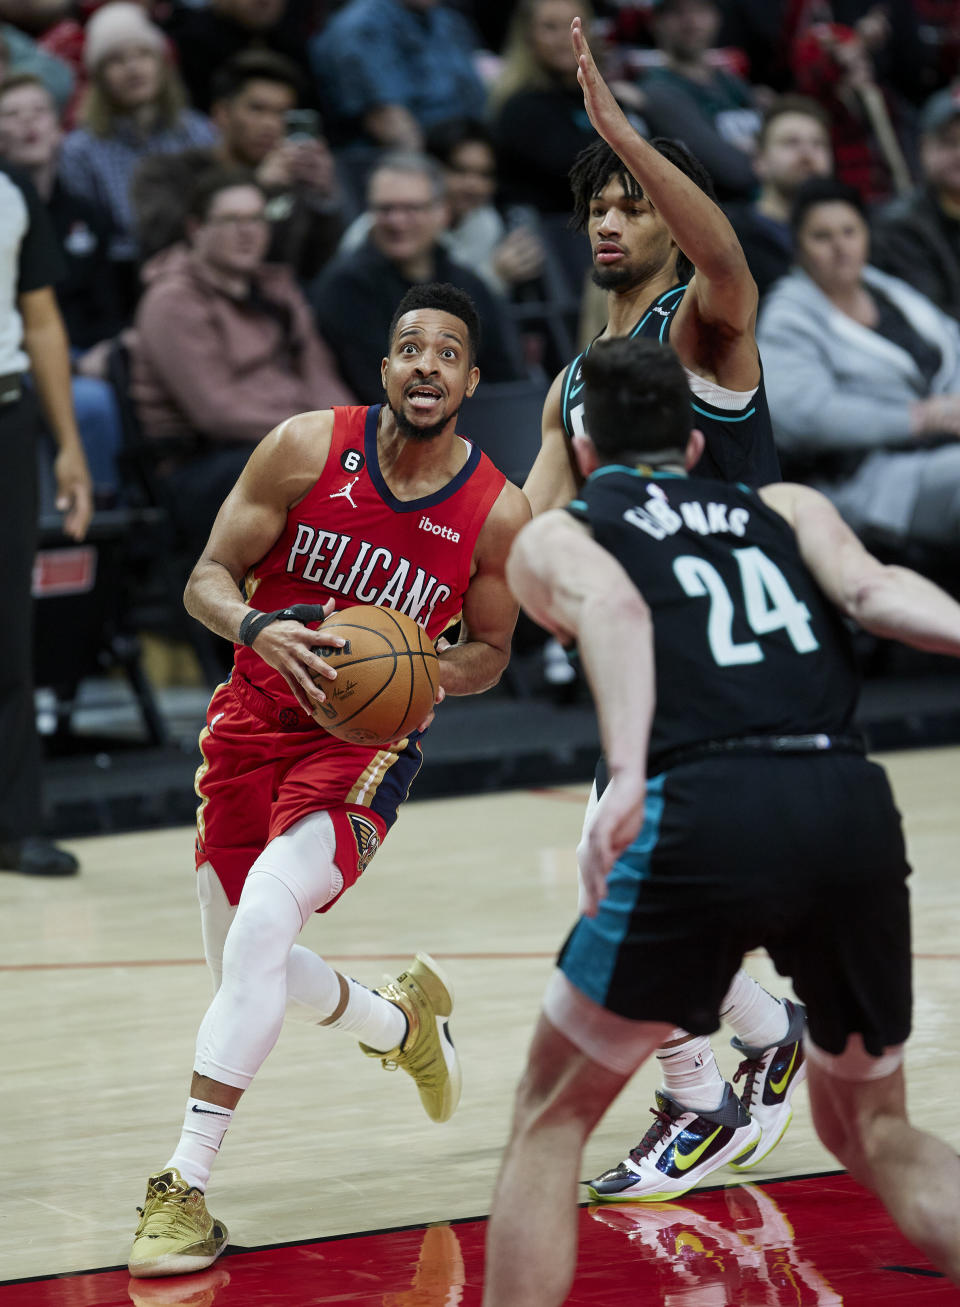 New Orleans Pelicans guard CJ McCollum, left, drives to the basket past Portland Trail Blazers guard Shaedon Sharpe, top right, and forward Drew Eubanks (24) during the second half of an NBA basketball game in Portland, Ore., Monday, March 27, 2023. (AP Photo/Craig Mitchelldyer)